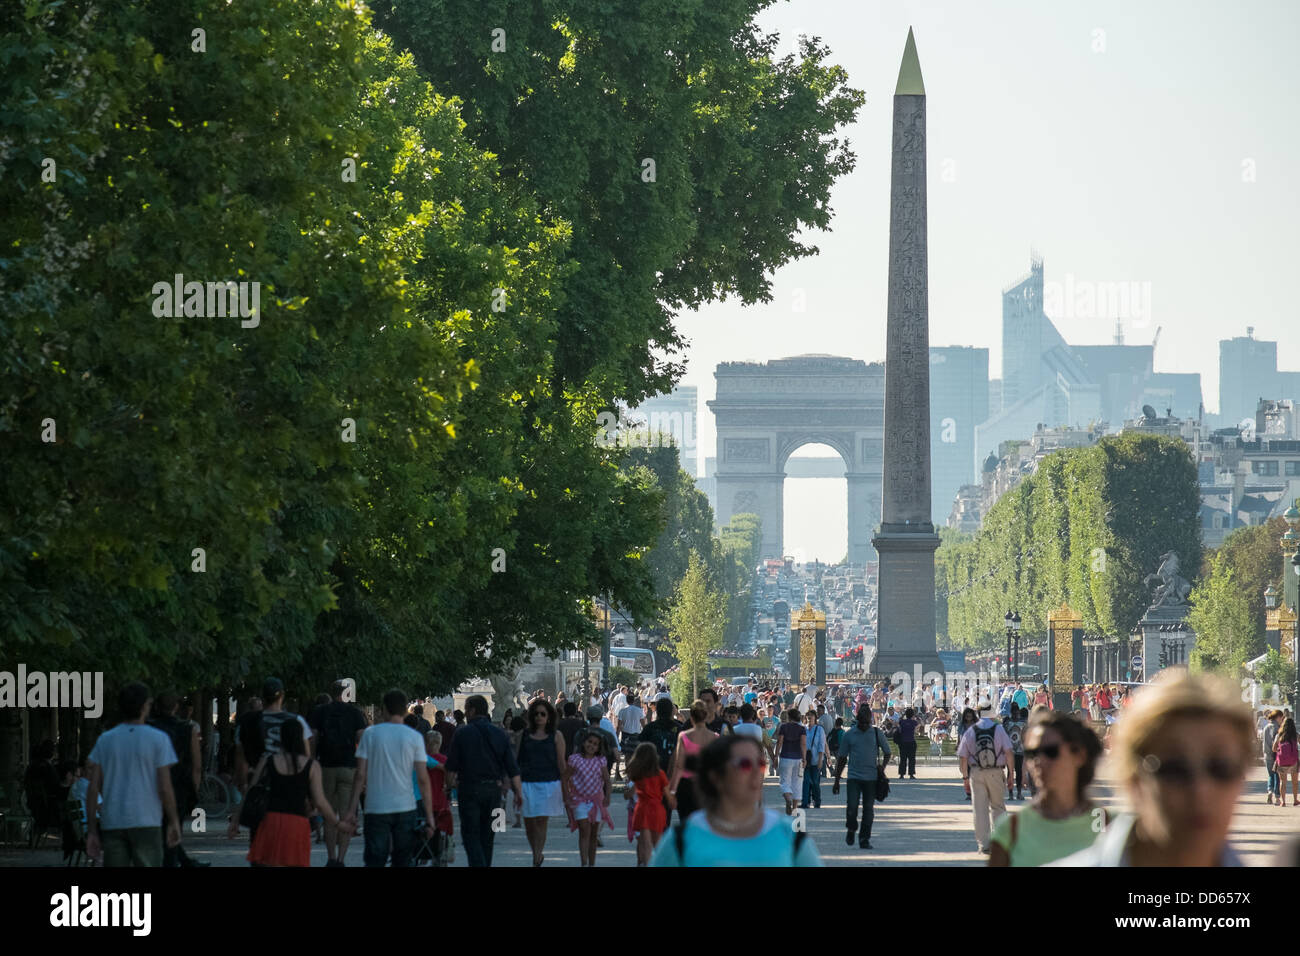 Crowds along the Champs Elysees, from the Place de la Concorde to the Arc de Triomphe in Paris, France. Stock Photo